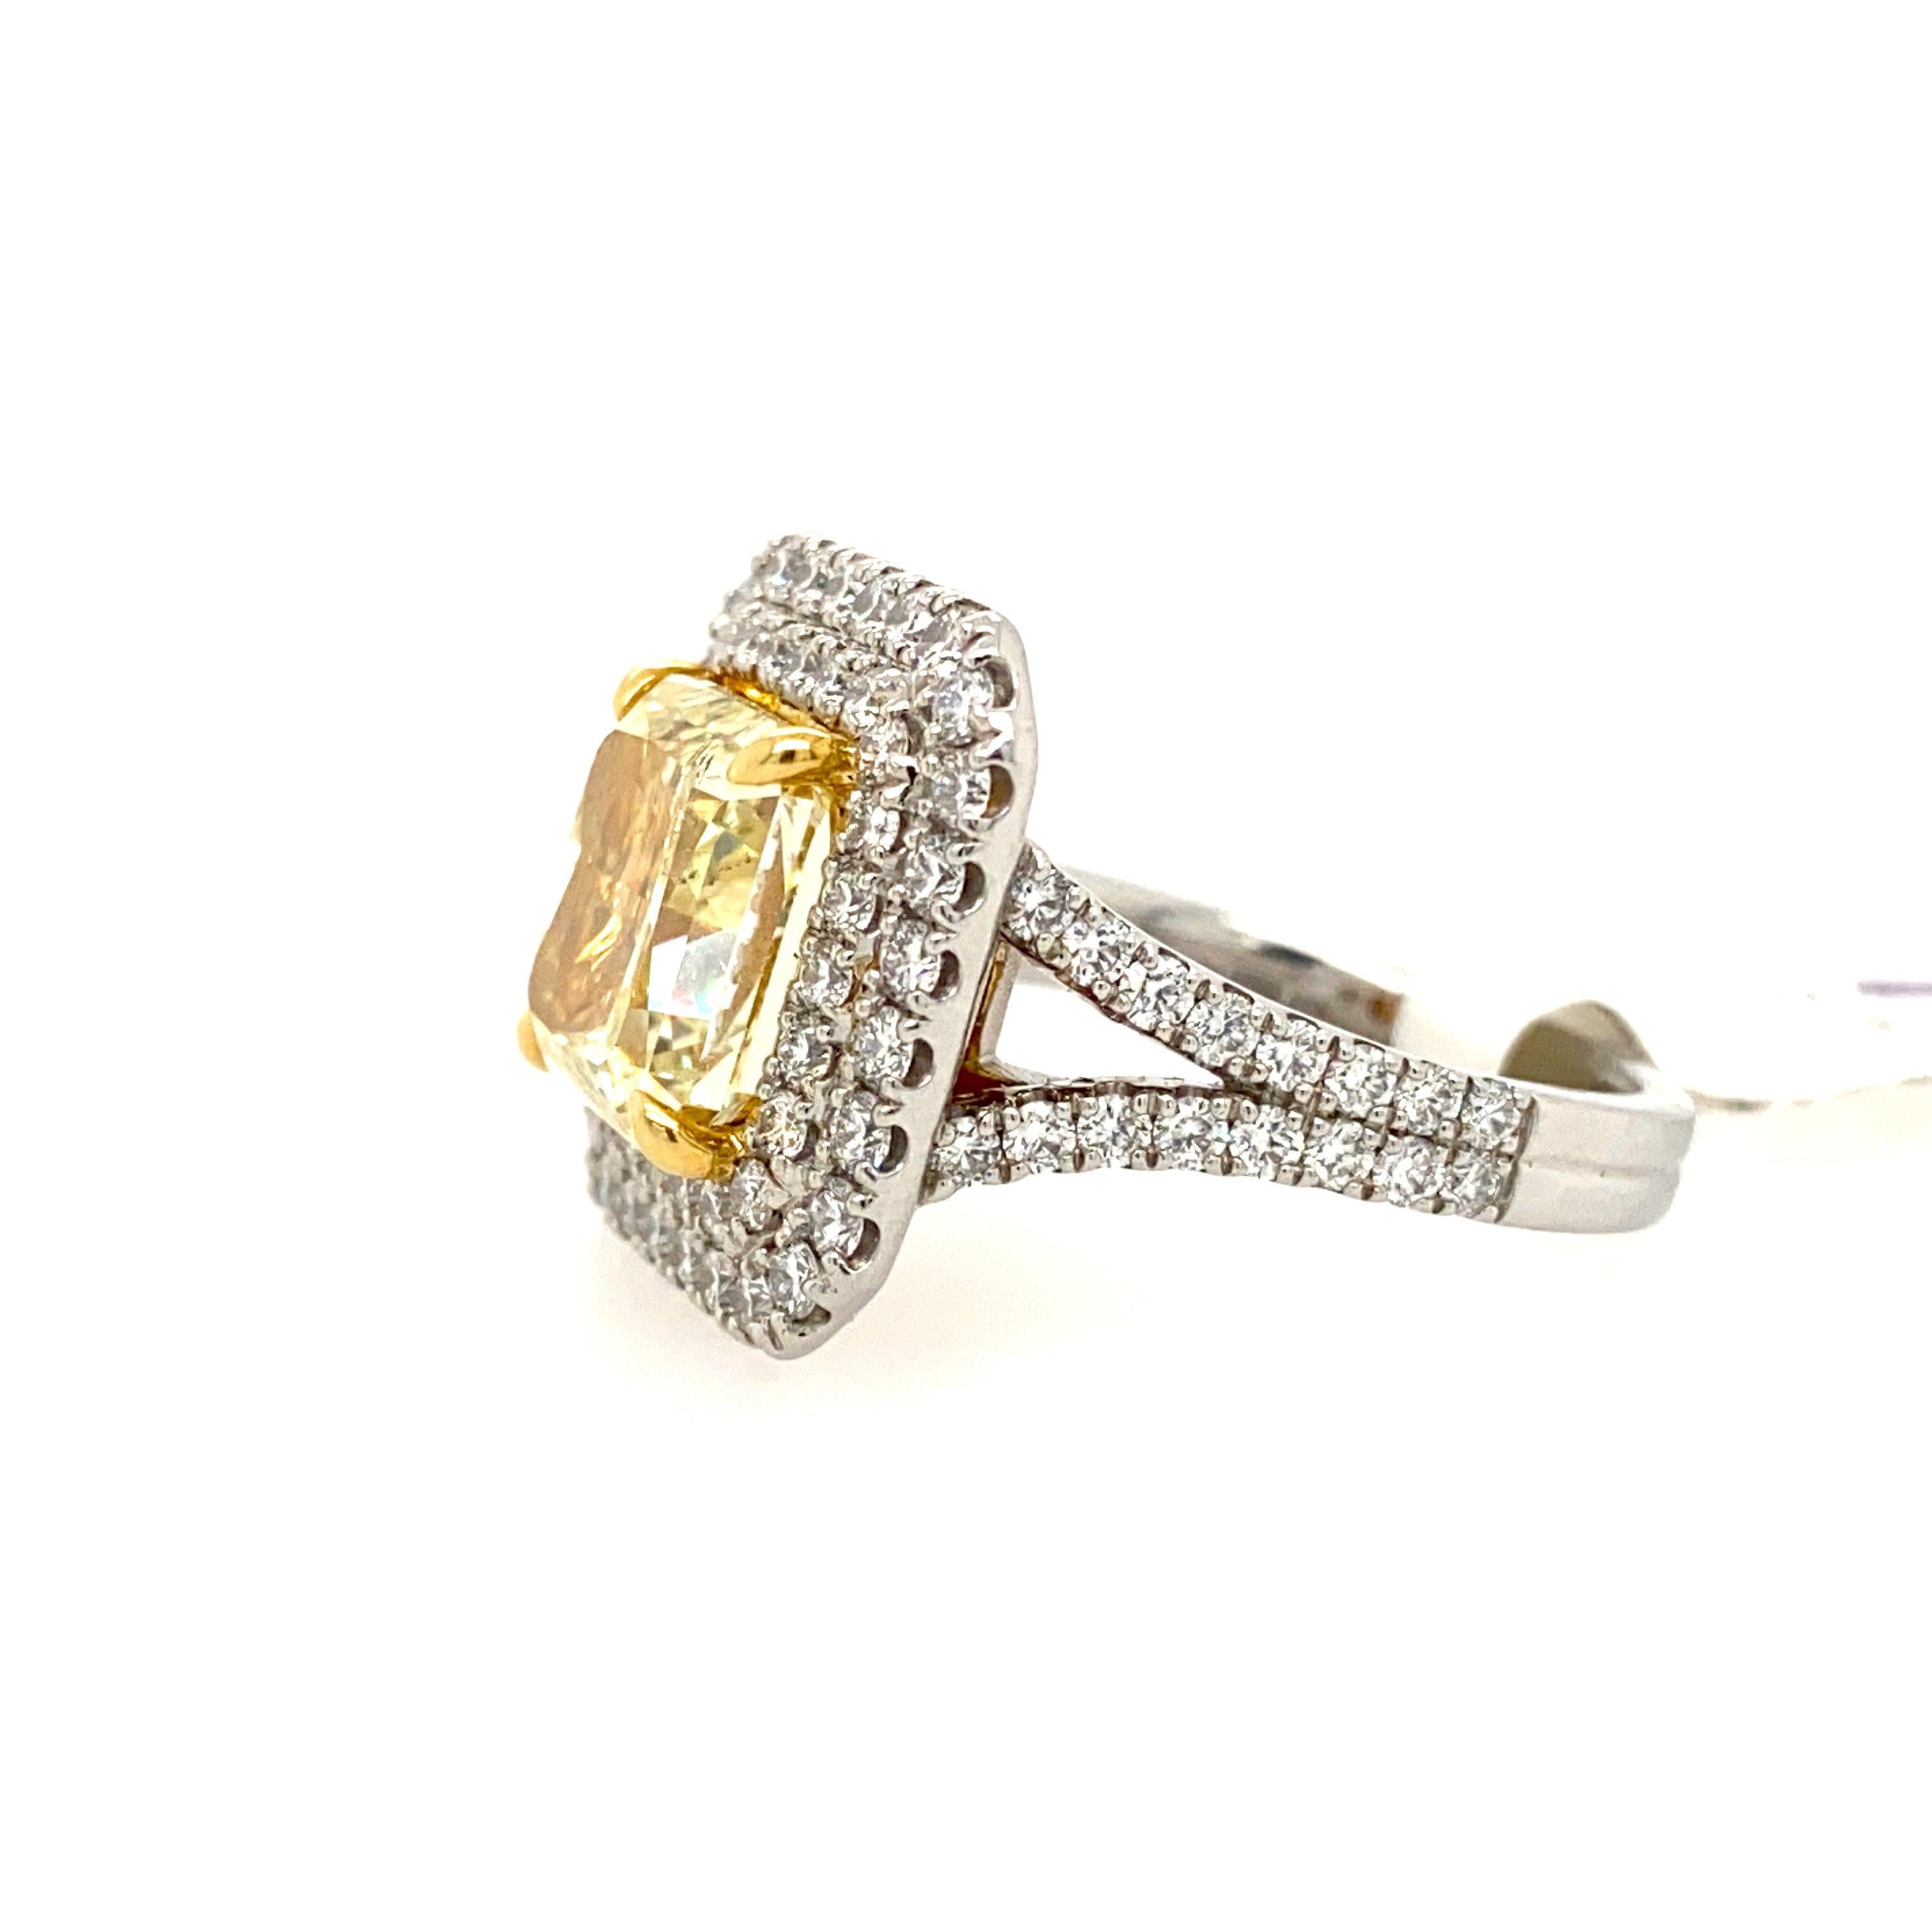 This beautiful radiant cut diamond is set in a double halo diamond ring made of platinum and 18k yellow gold.
Yellow gold diamonds this size are rare and valuable.
White diamonds weight is 0.80 carat total.